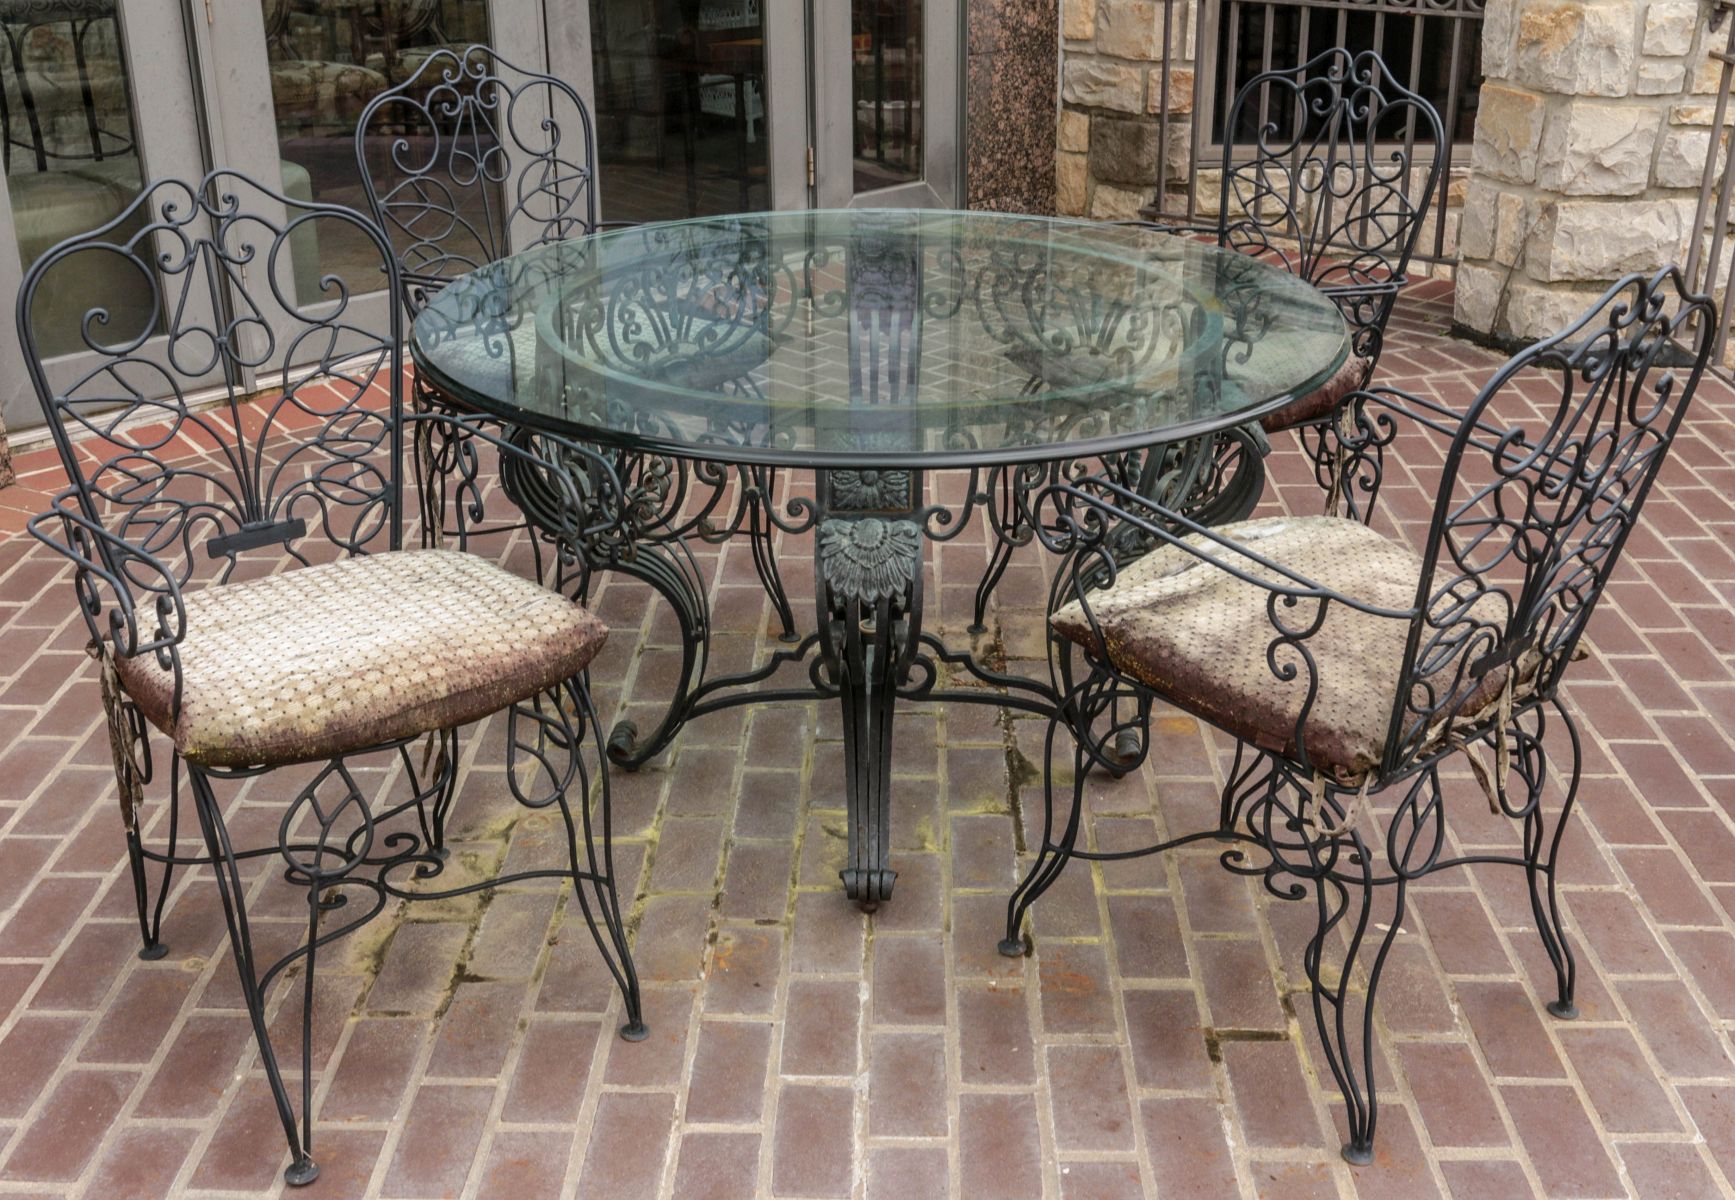 A SIX-CHAIR WROUGHT IRON OUTDOOR PATIO DINING SET